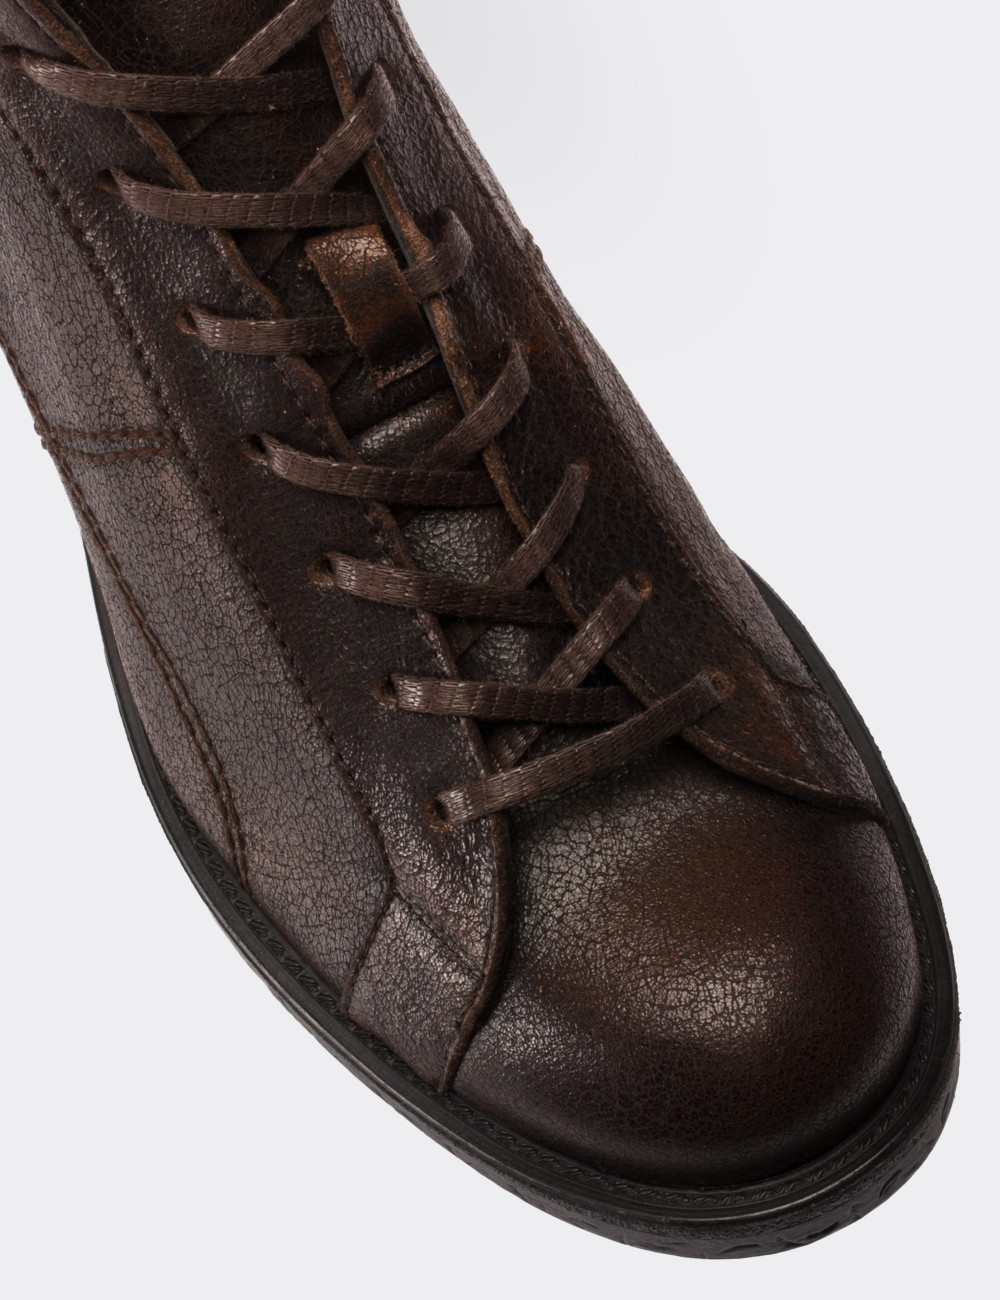 Brown Suede Leather Boots - 01760MKHVC05